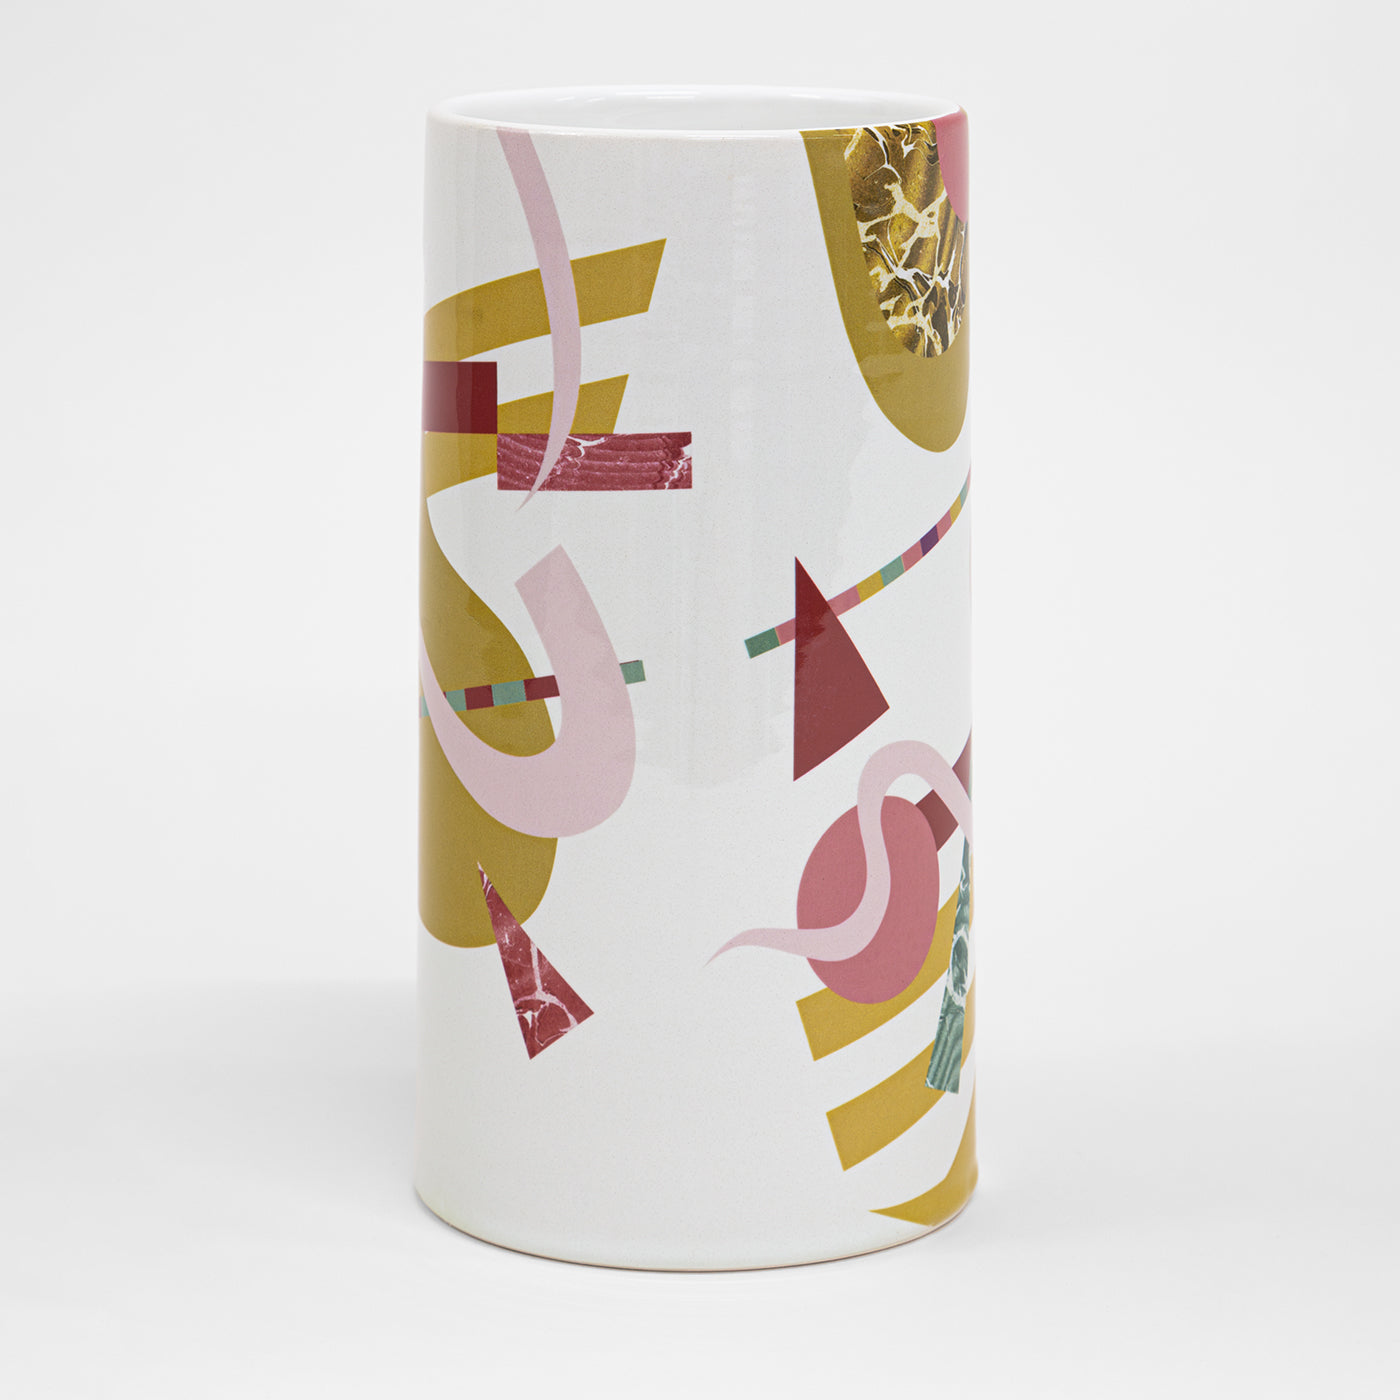 Alchimie Cylindrical Ceramic Vase with Abstract Decor - Alternative view 1